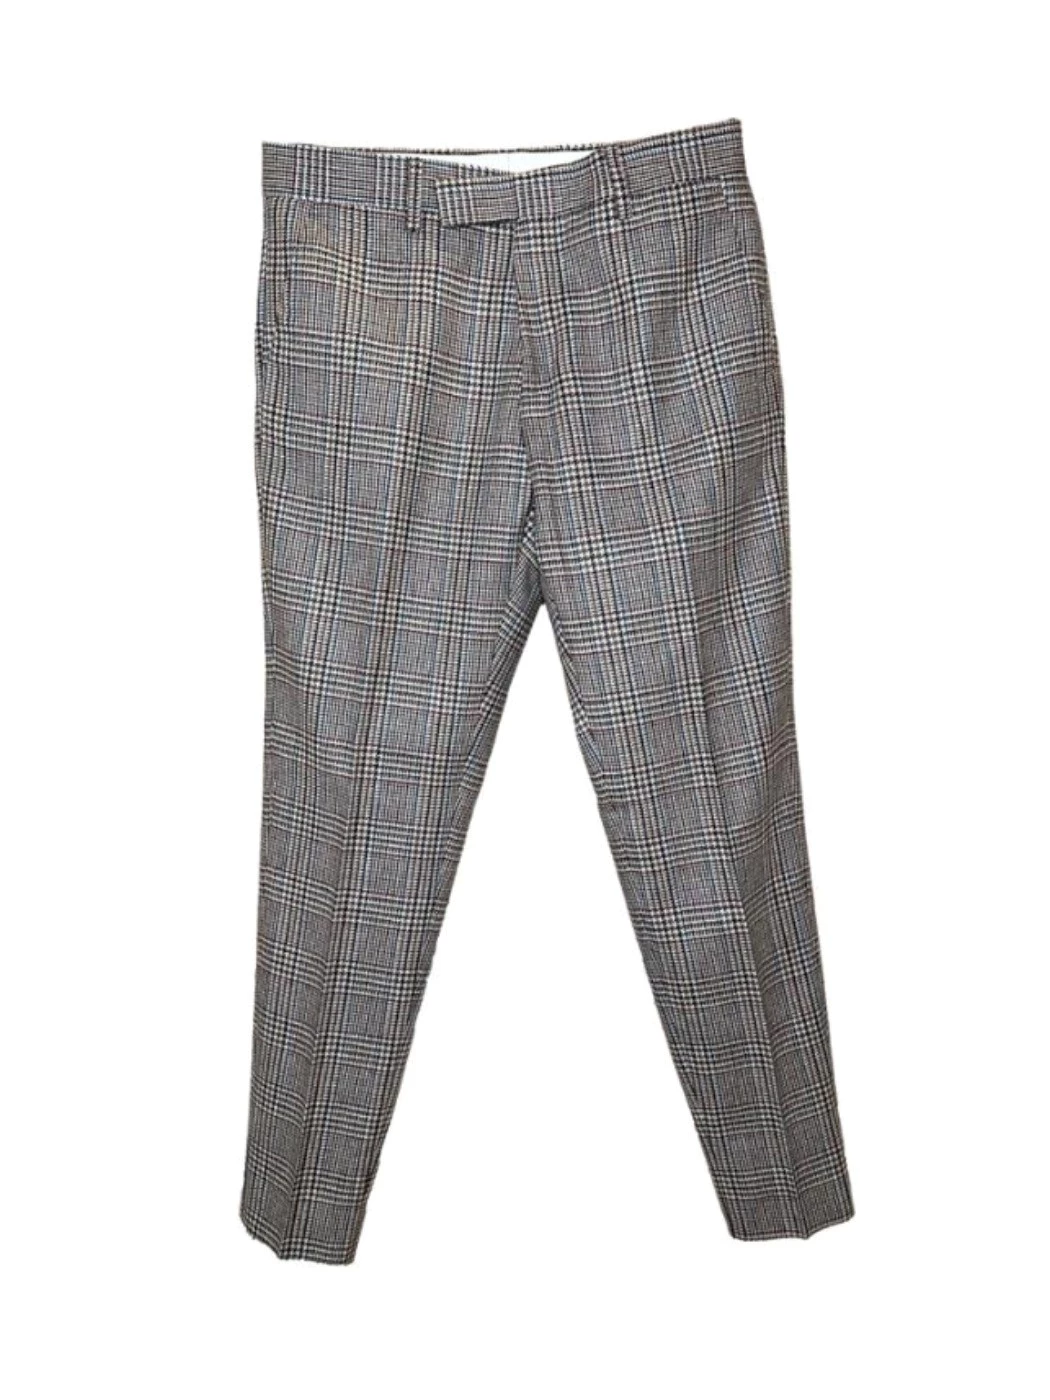 Pants houndstooth Alessandro Gilles